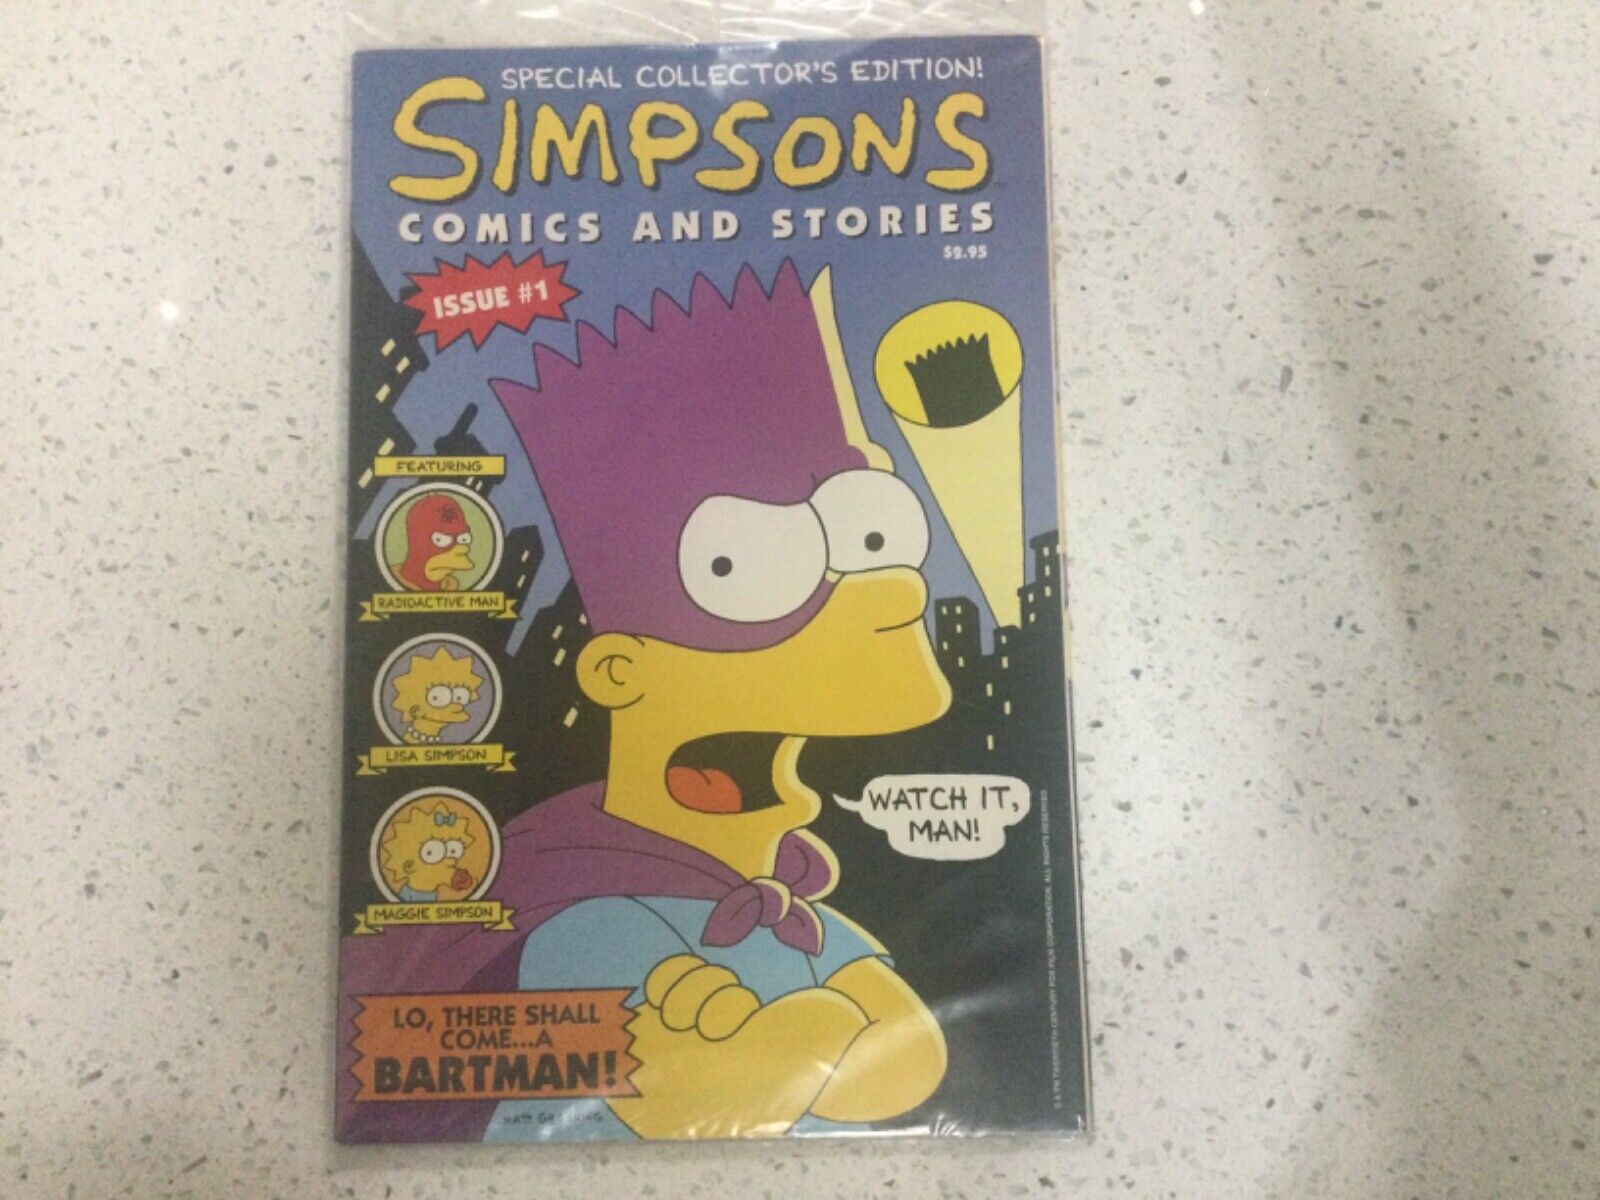 SIMPSONS COMIC AND STORIES #1 SPECIAL COLLECTORS EDITION NM 1993 SEALED UNOPENED